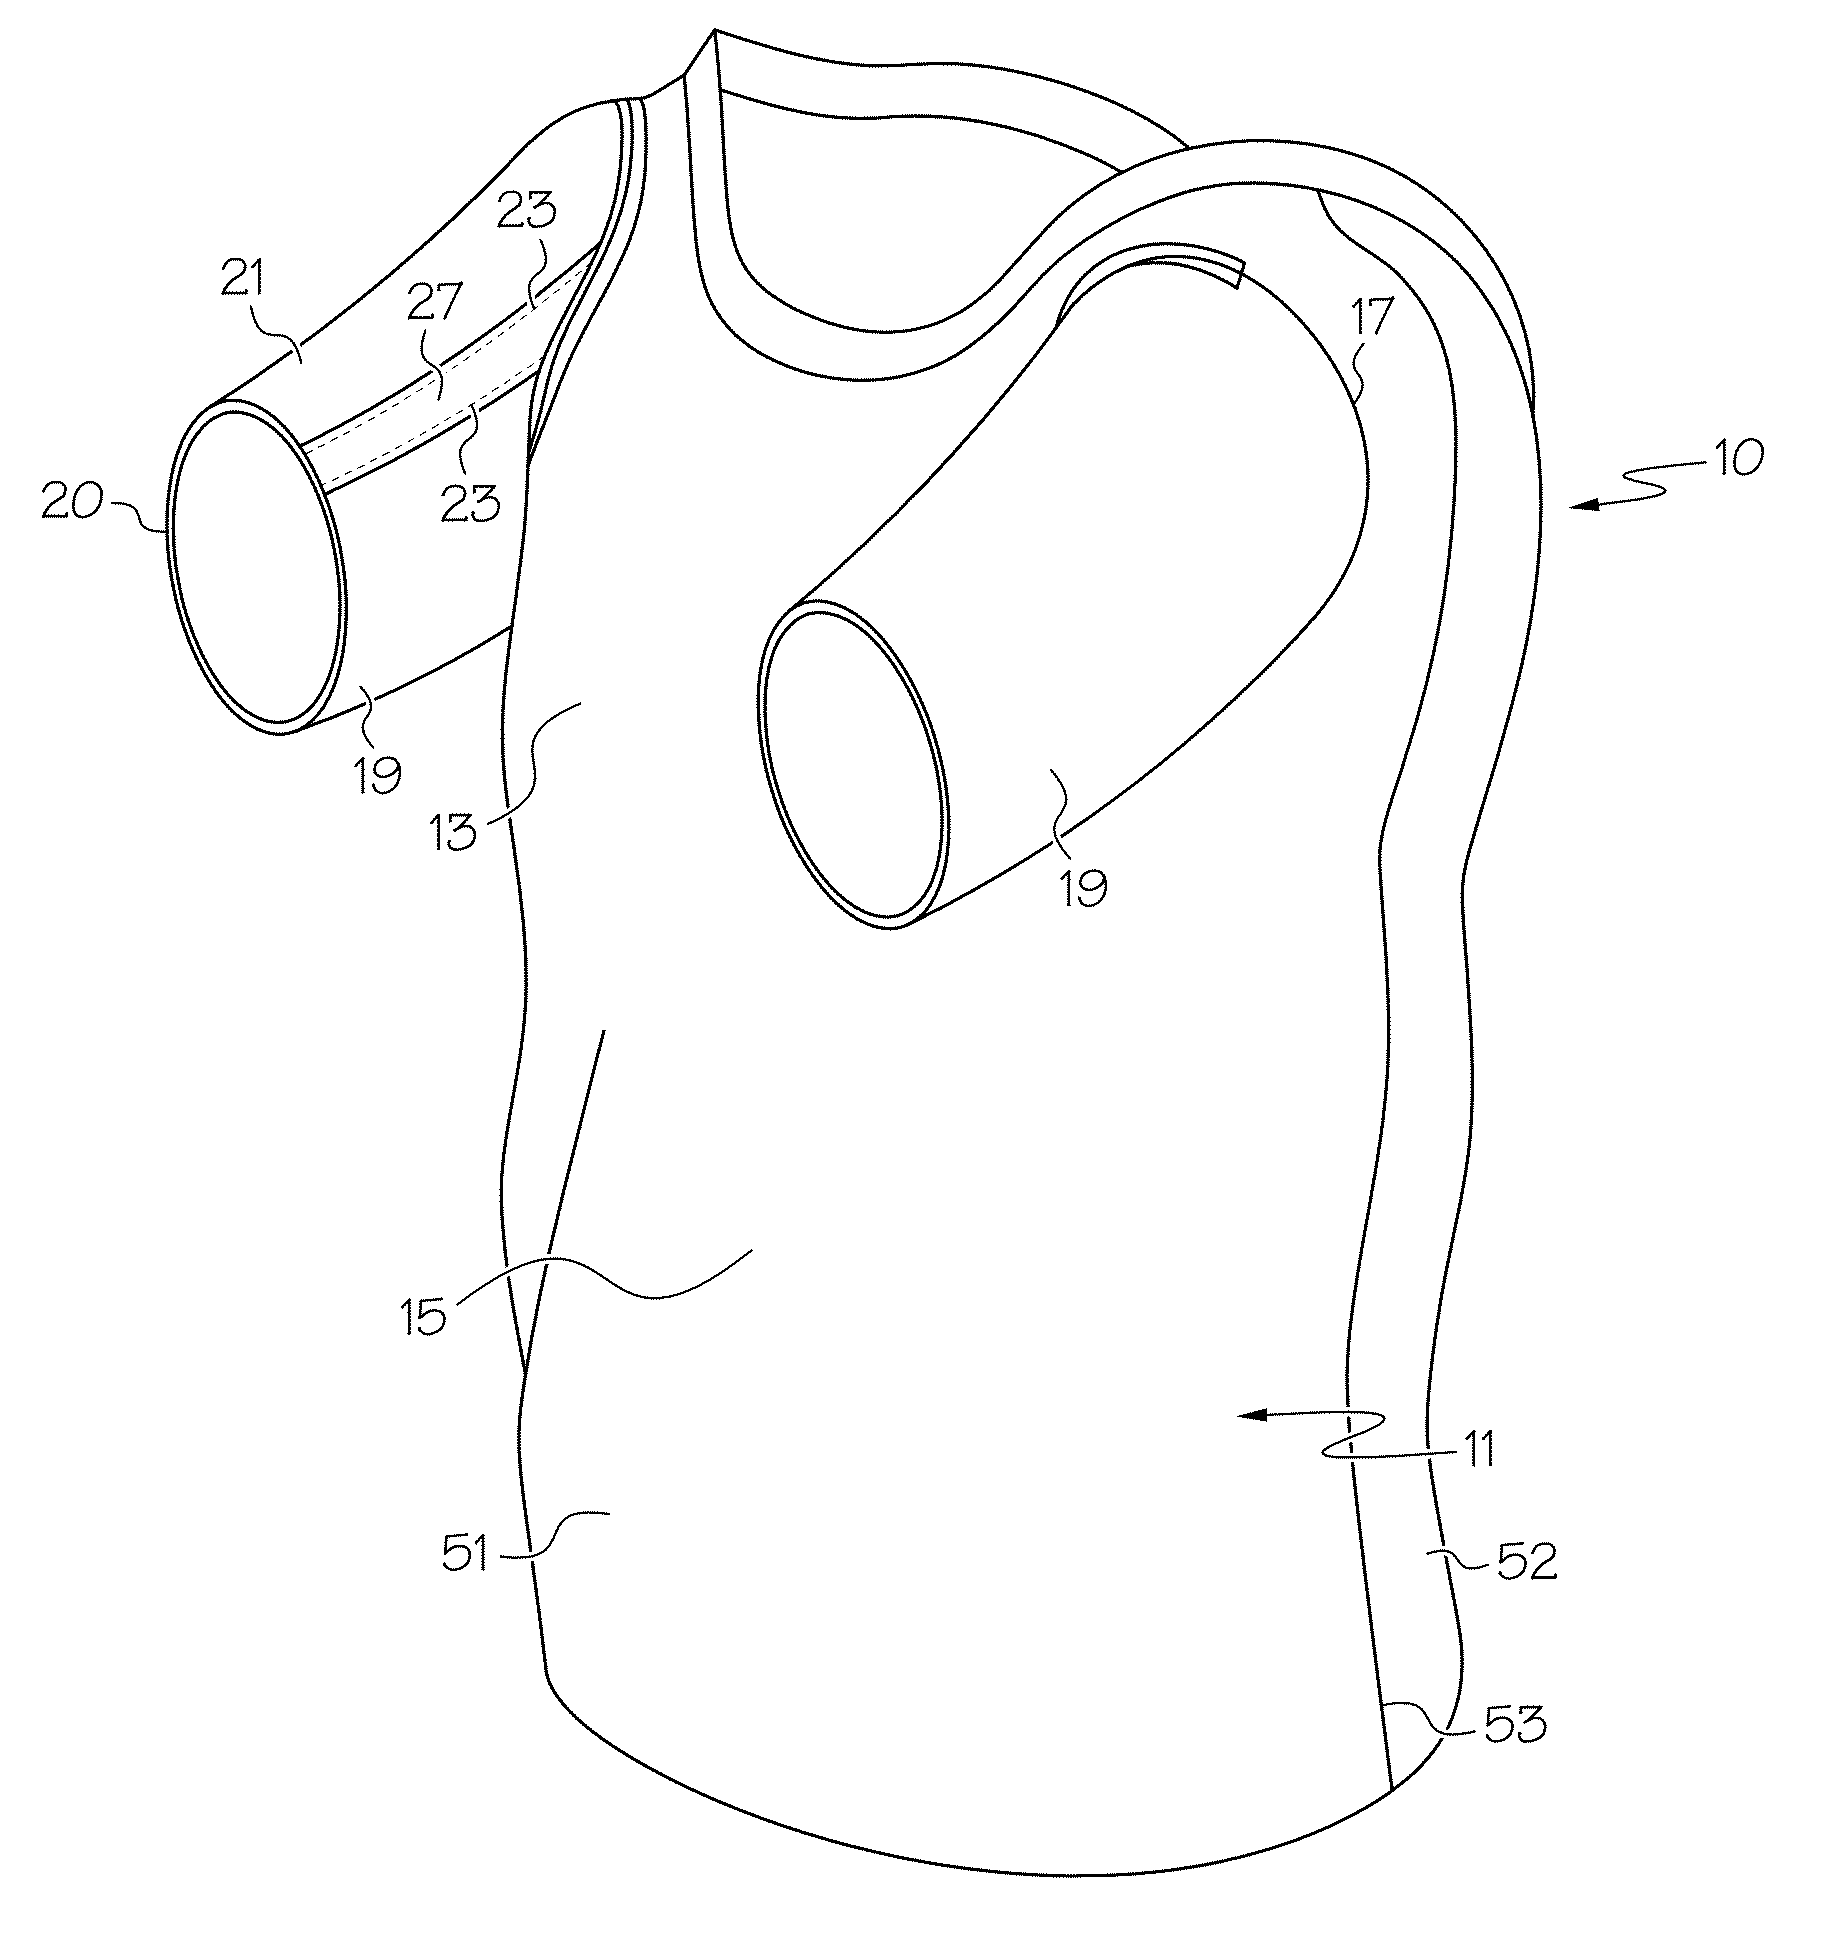 Support shirt with sleeve reinforcement regions